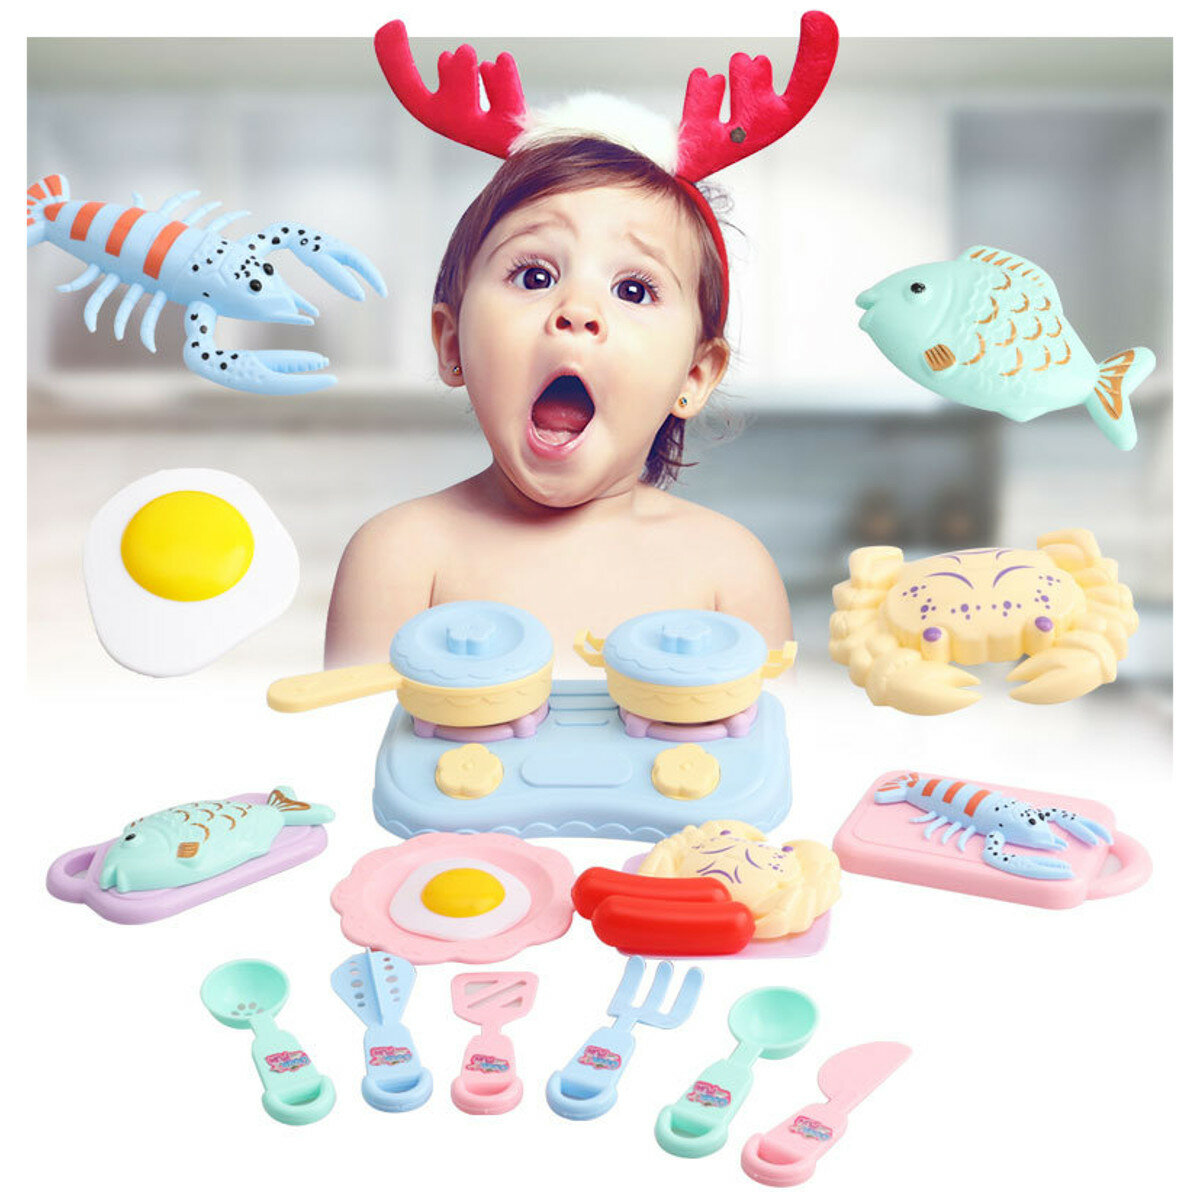 Kids DIY Kitchen Play Toys Simulation Kitchen Role Play Children Cooking Toys Gift